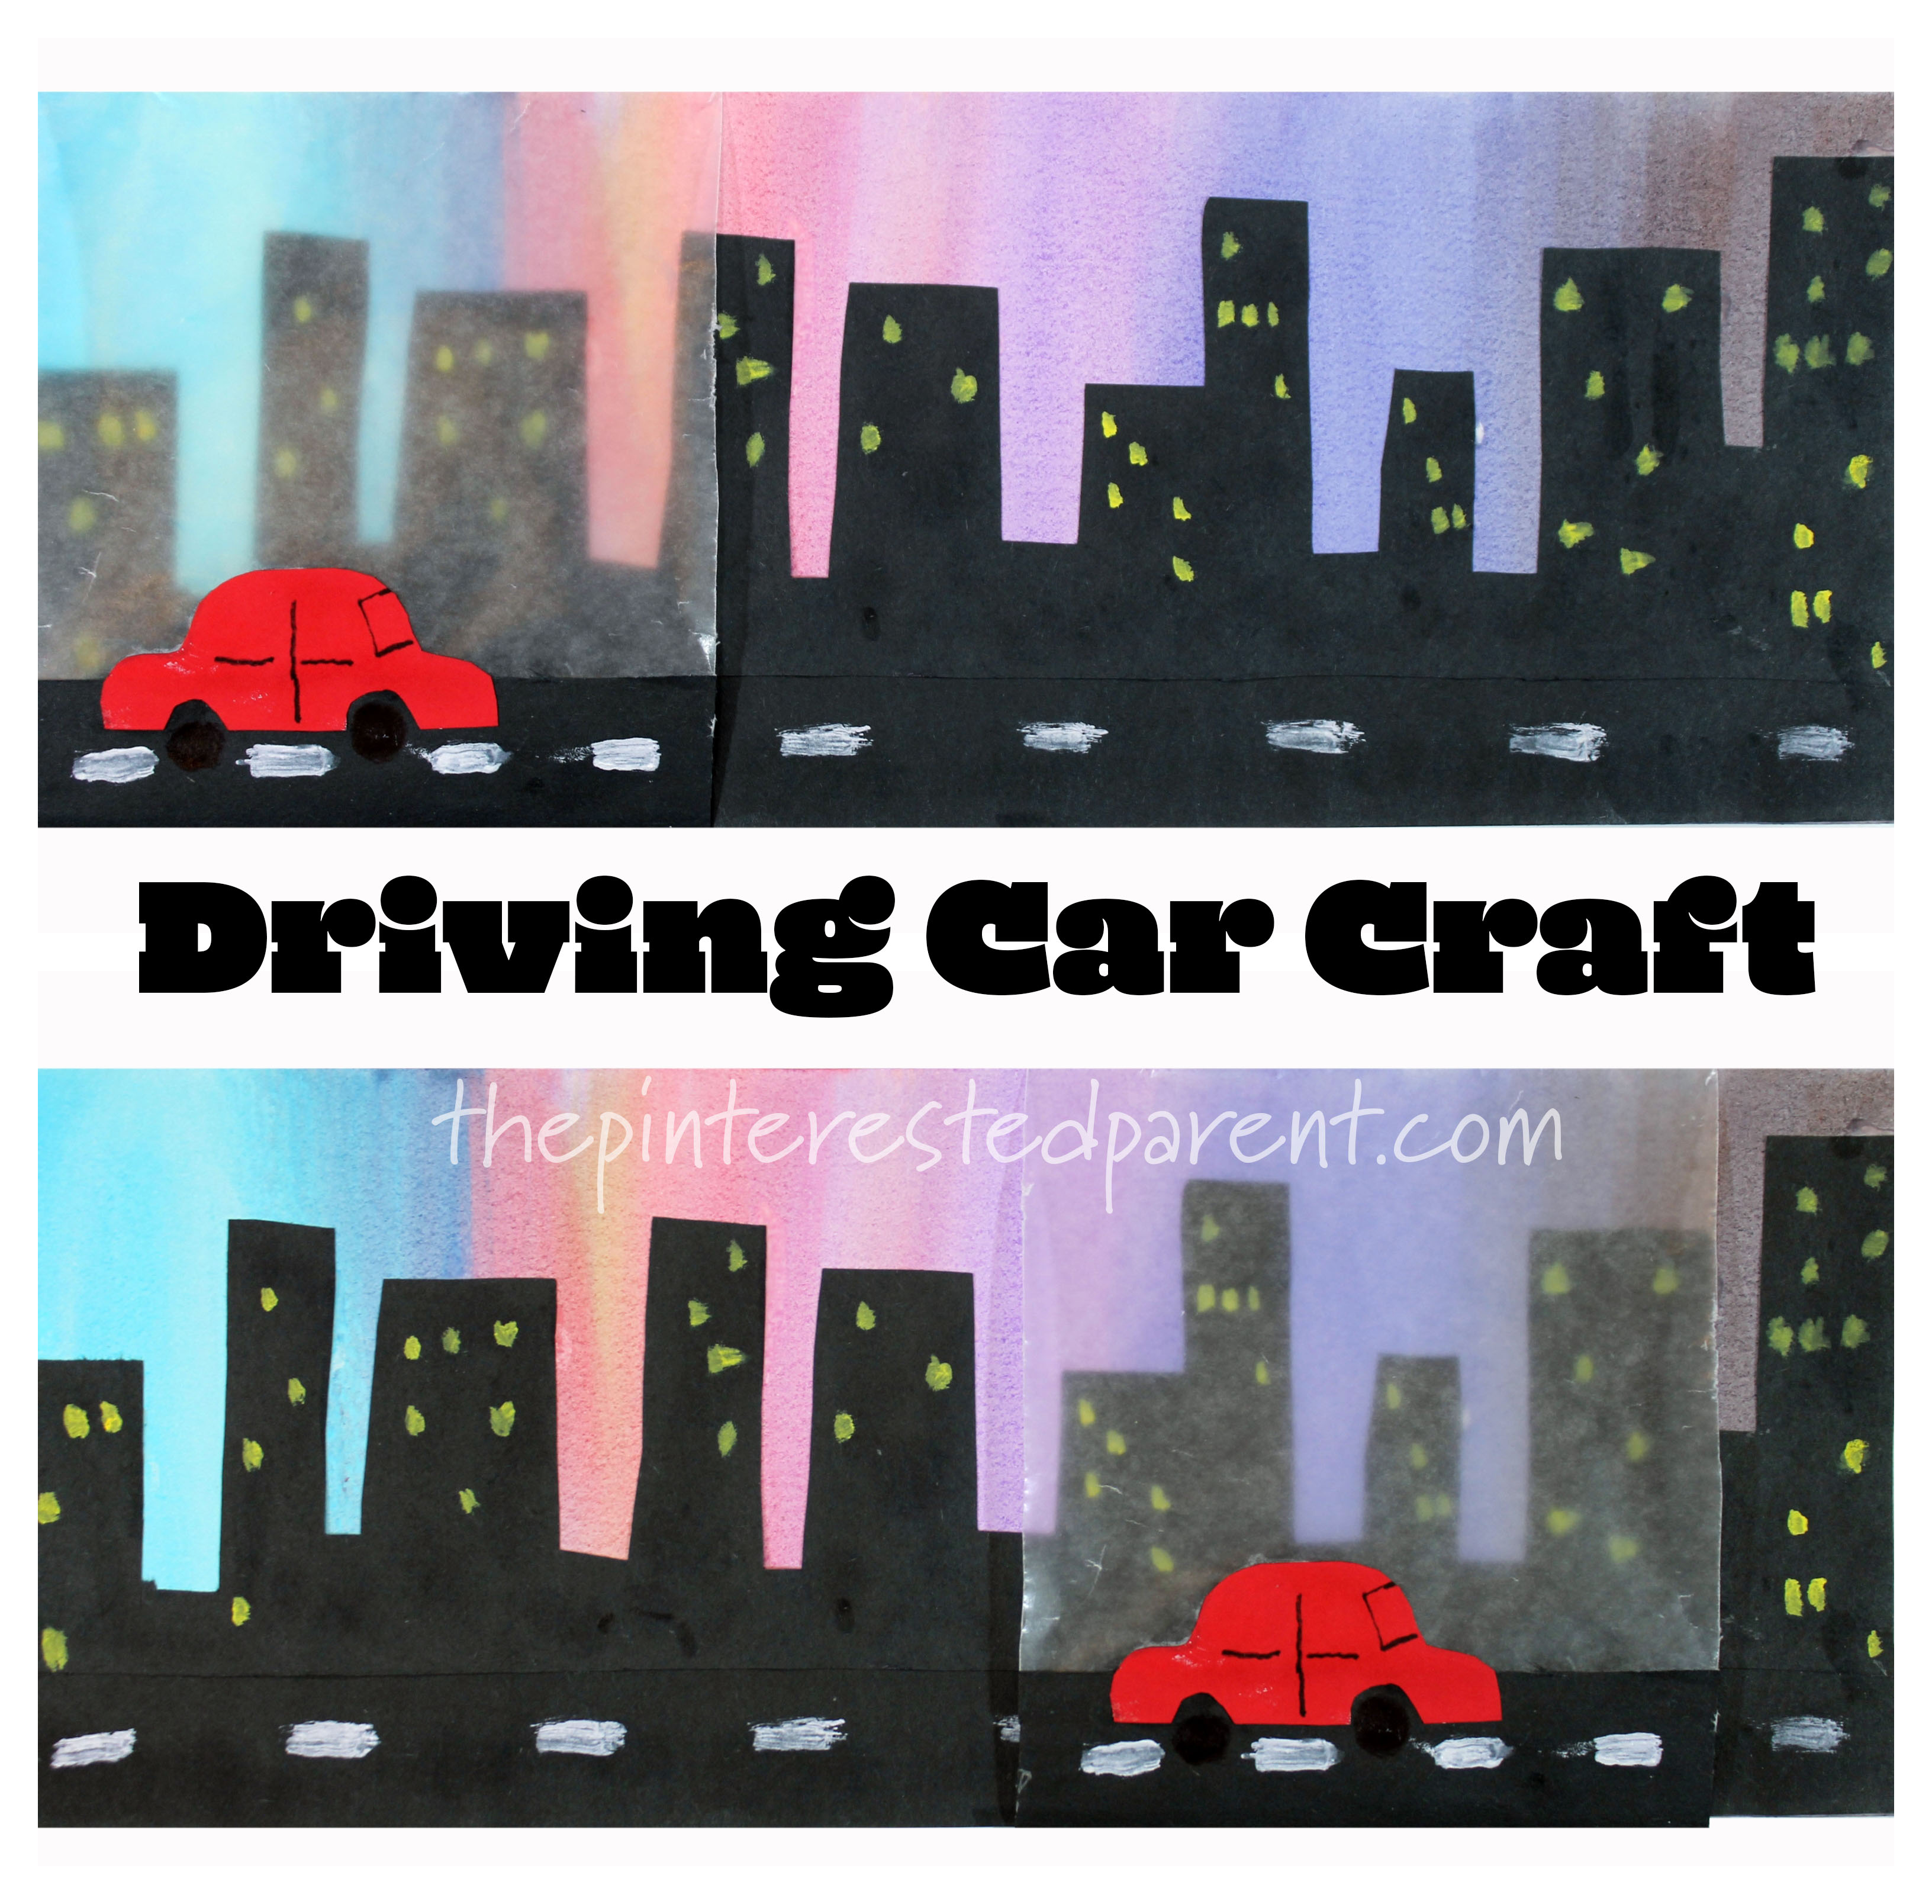 Watch your car go!! Driving car craft. Craft in motion. Kids's arts and crafts.